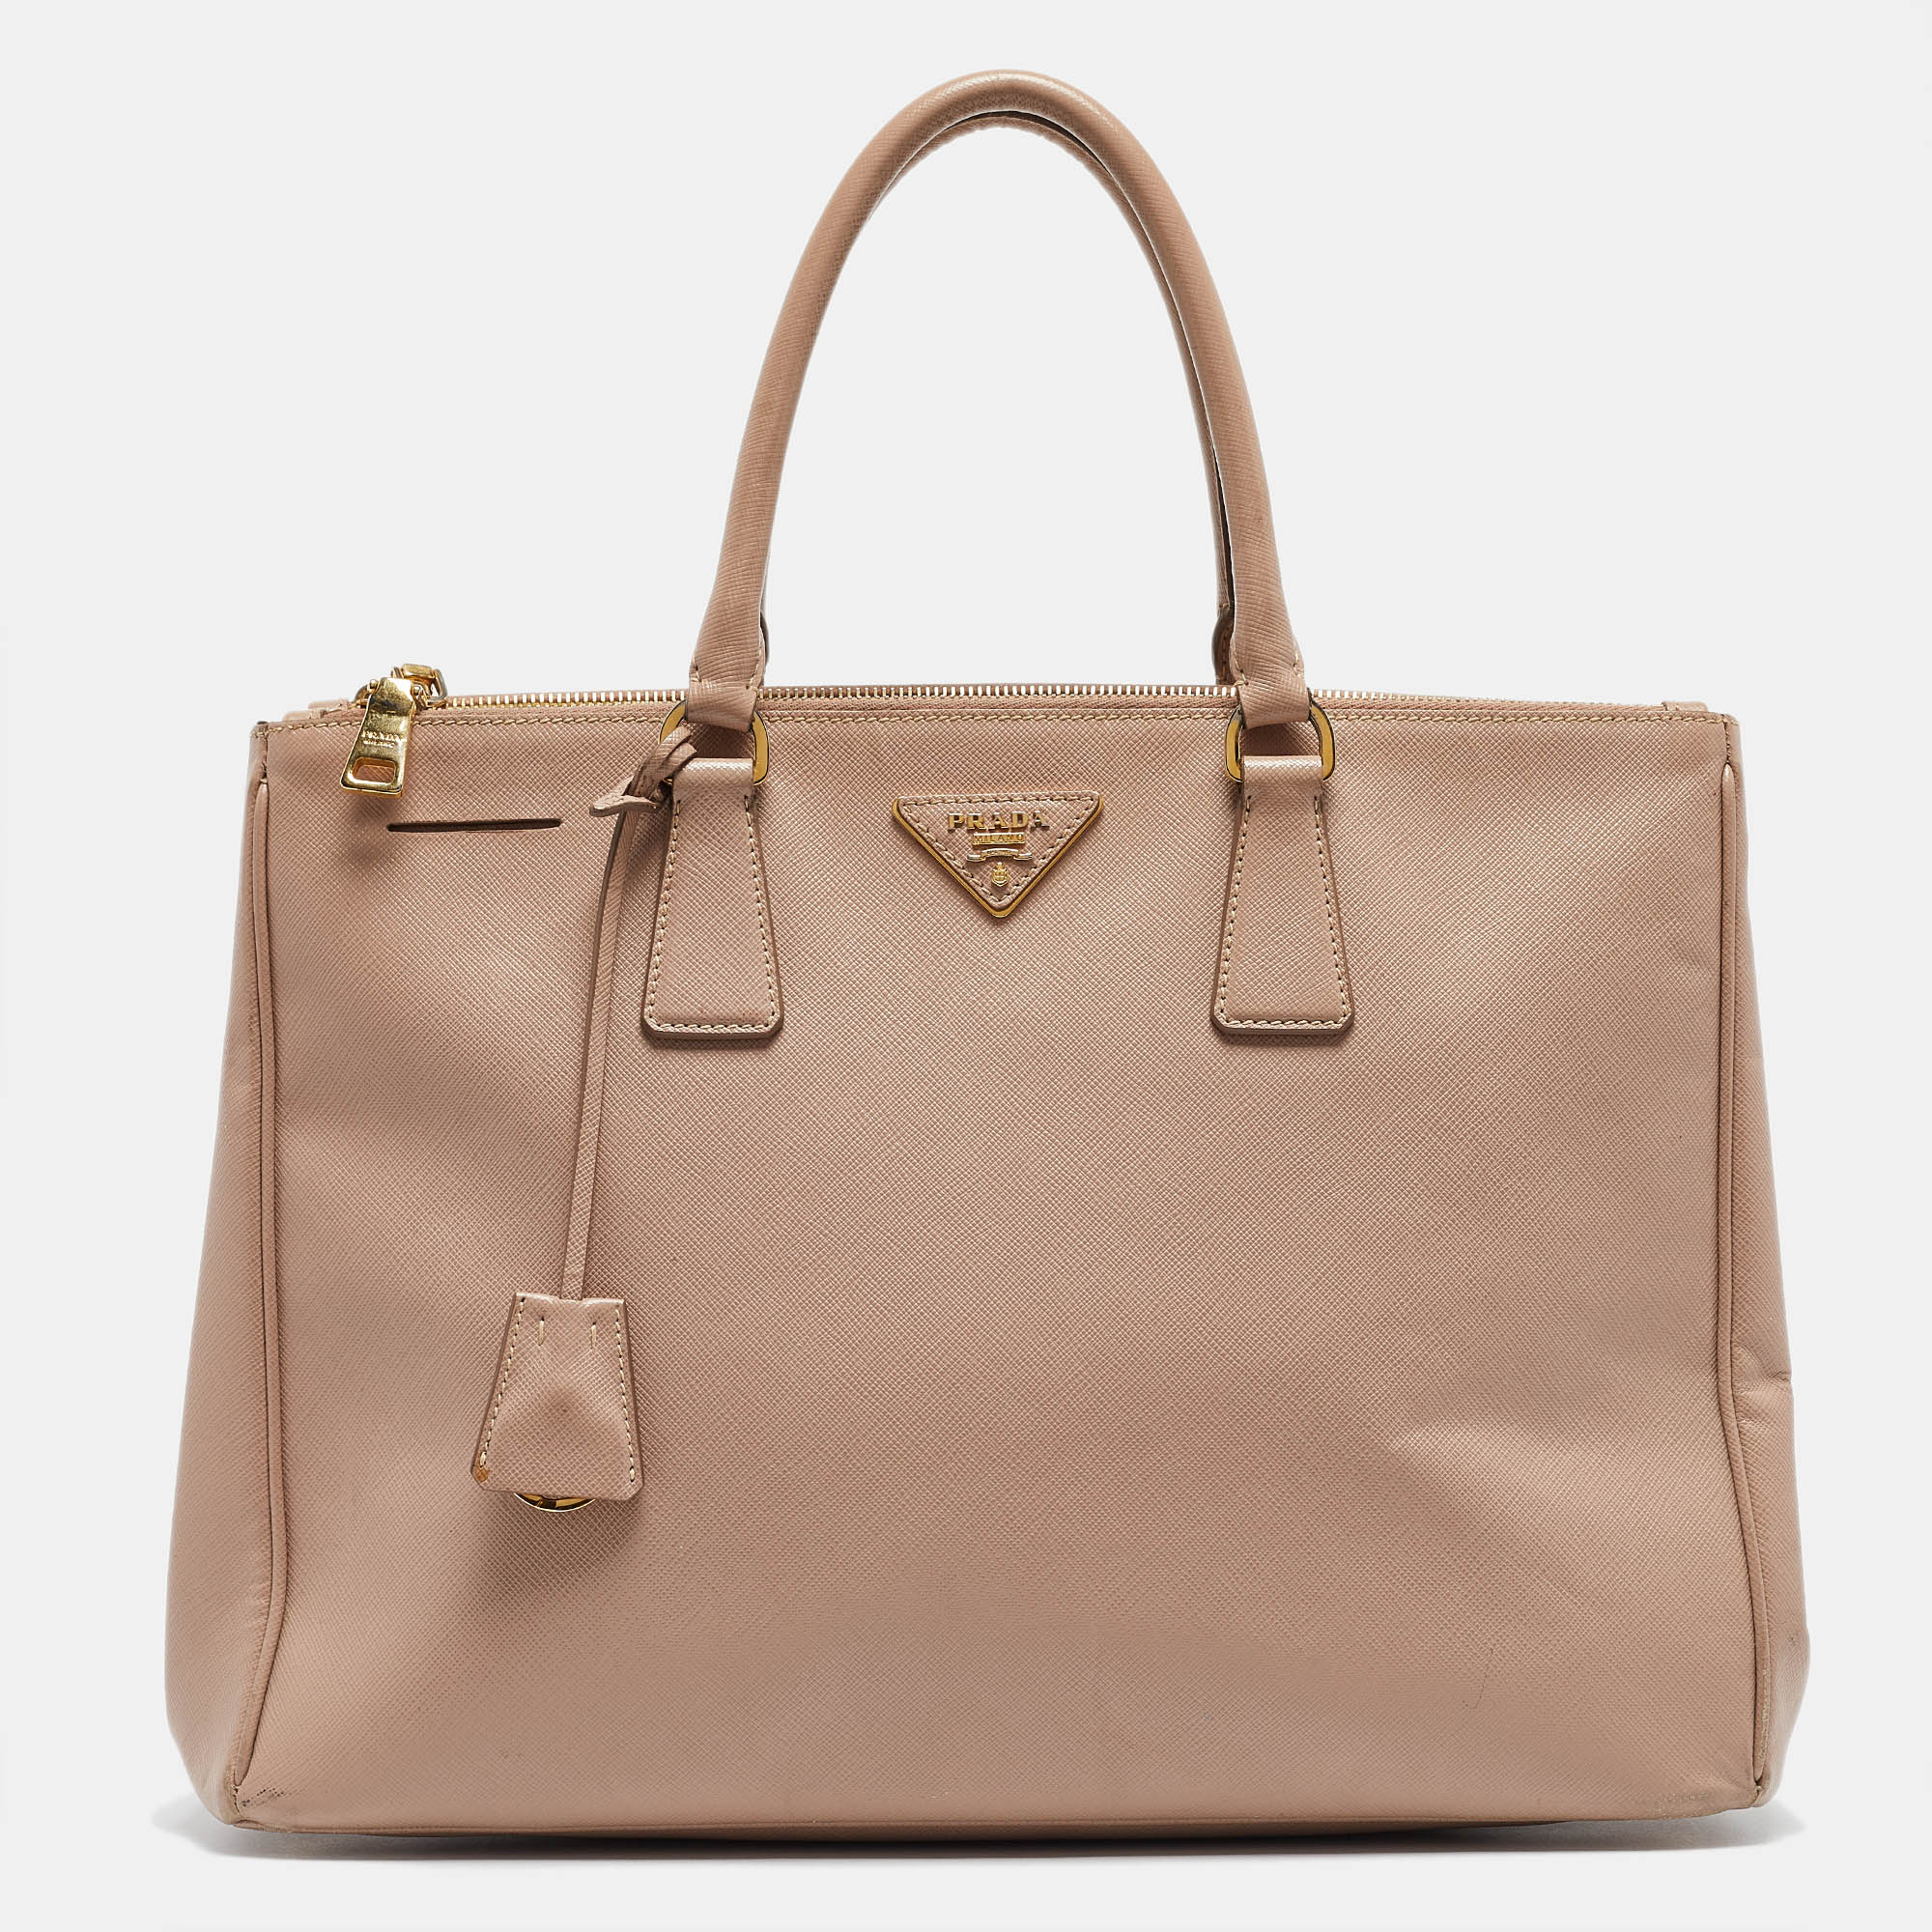 

Prada Light Pink Saffiano Lux Leather  Double Zip Tote